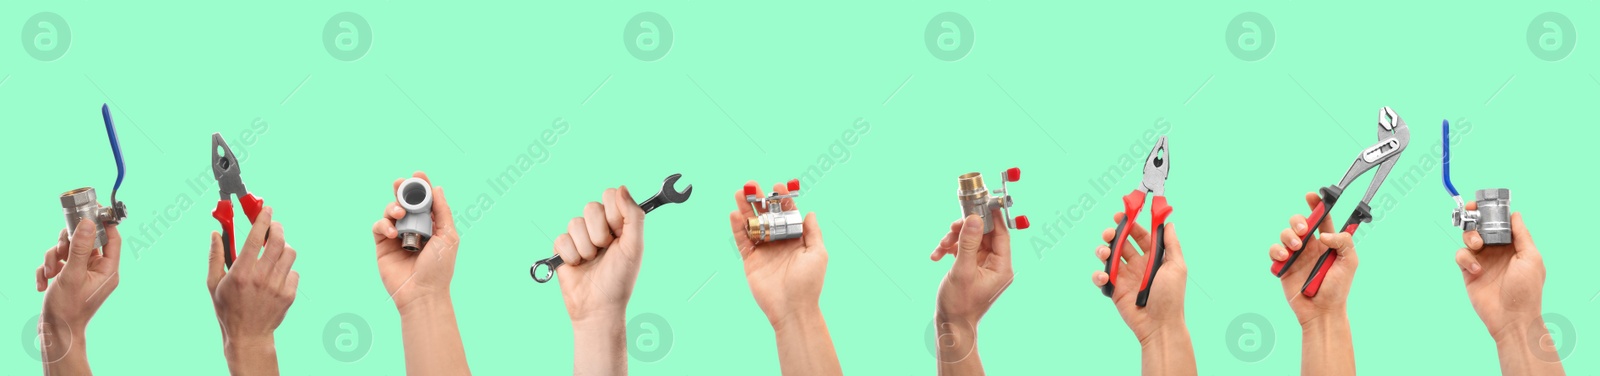 Image of Collage with photos of men holding different plumbing tools on turquoise background. Banner design